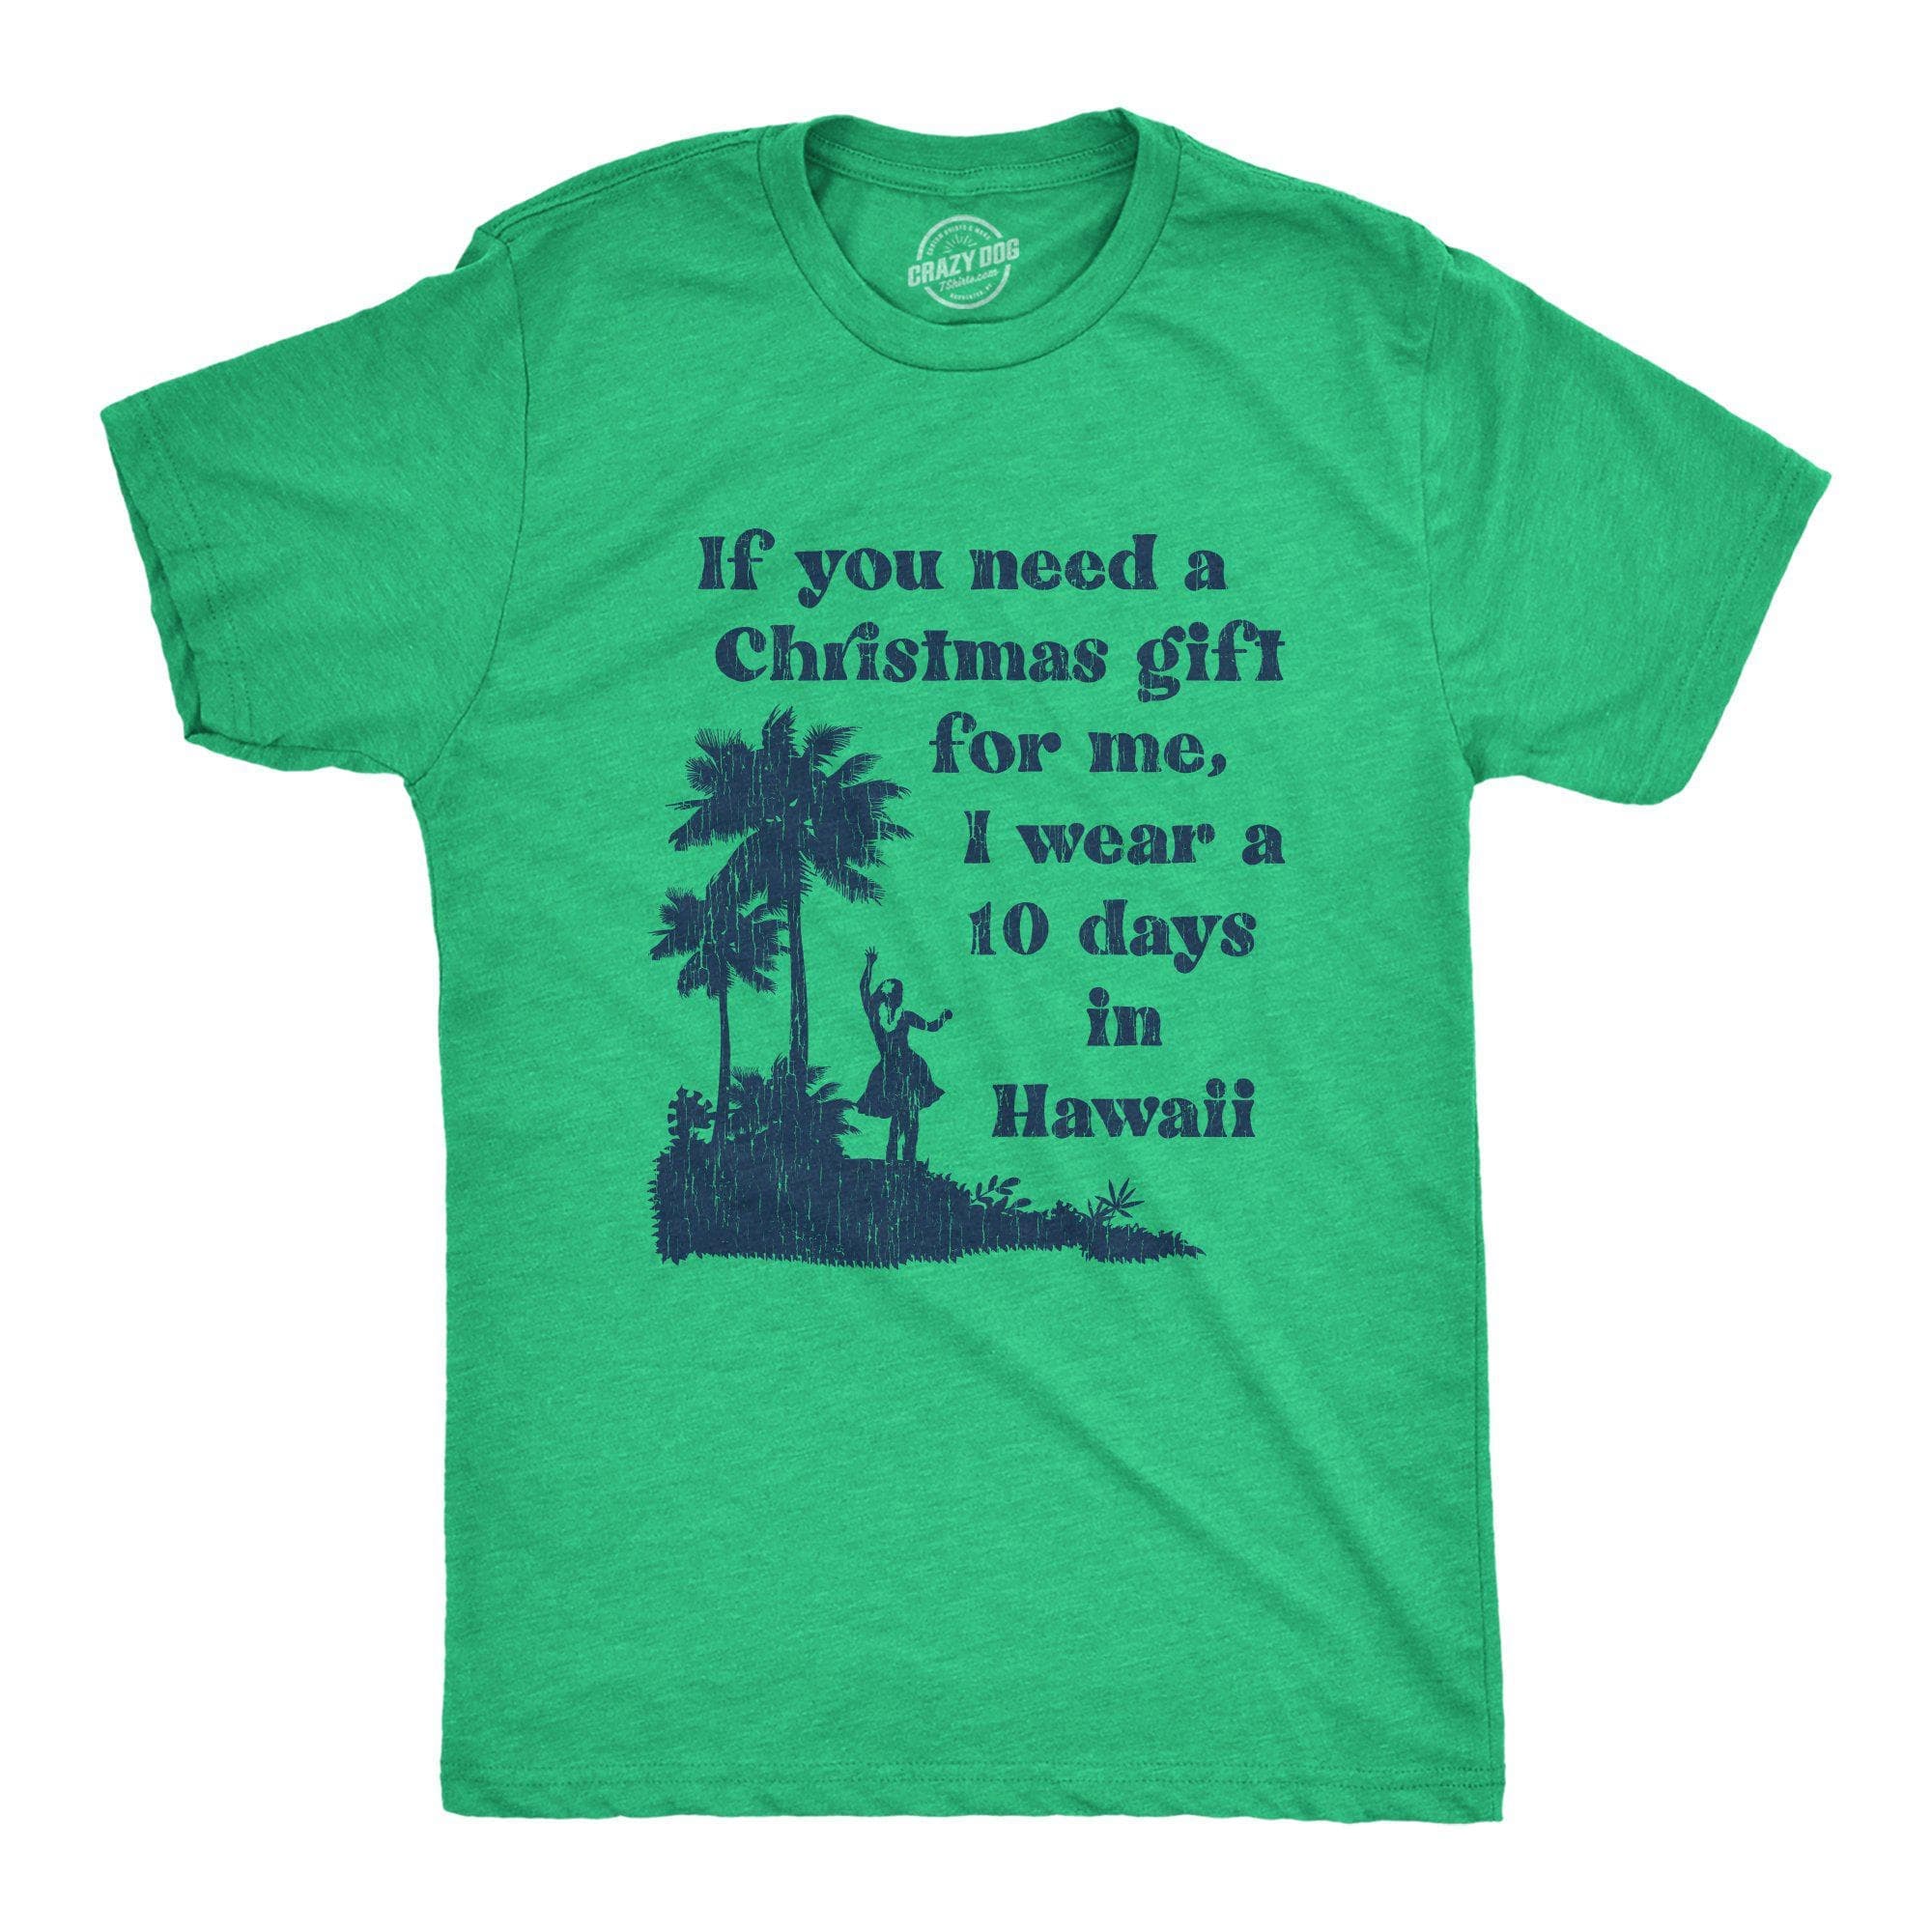 If You Need A Christmas Gift For Me I Wear A 10 Days In Hawaii Men's Tshirt - Crazy Dog T-Shirts